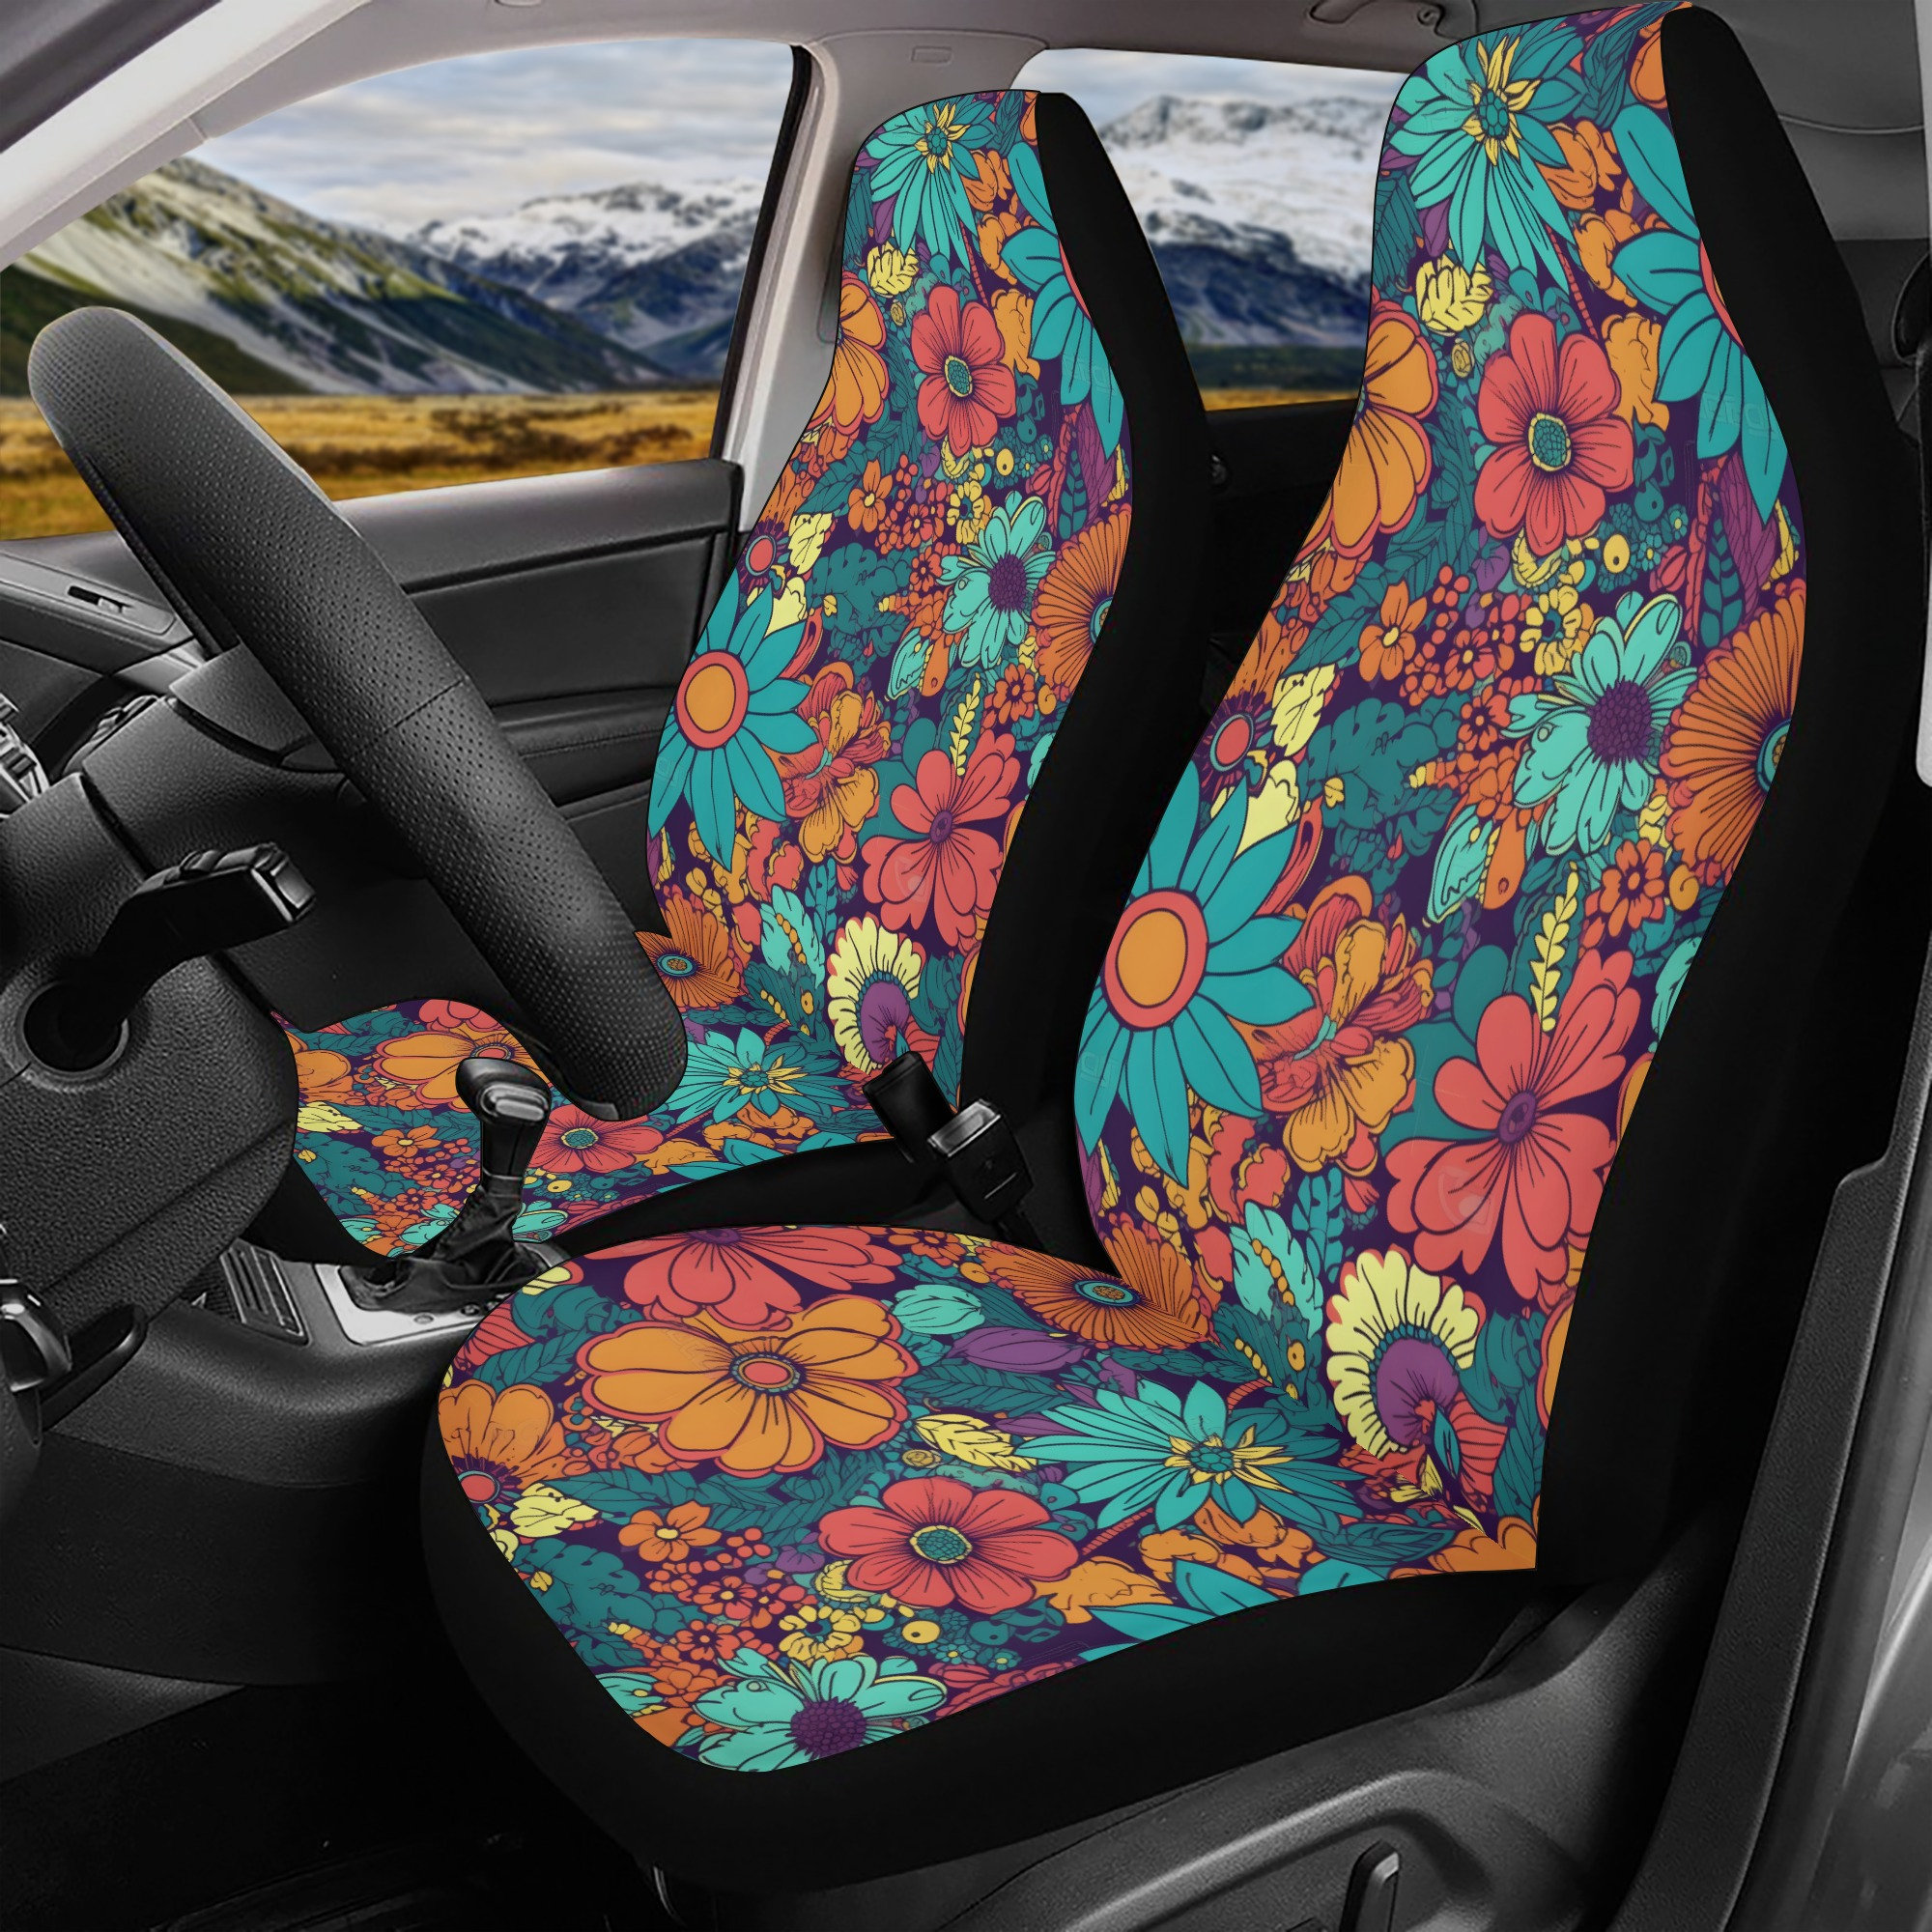 Bog Witch Aesthetic Car Seat Covers - Pvc Hippie Decor For All Seasons